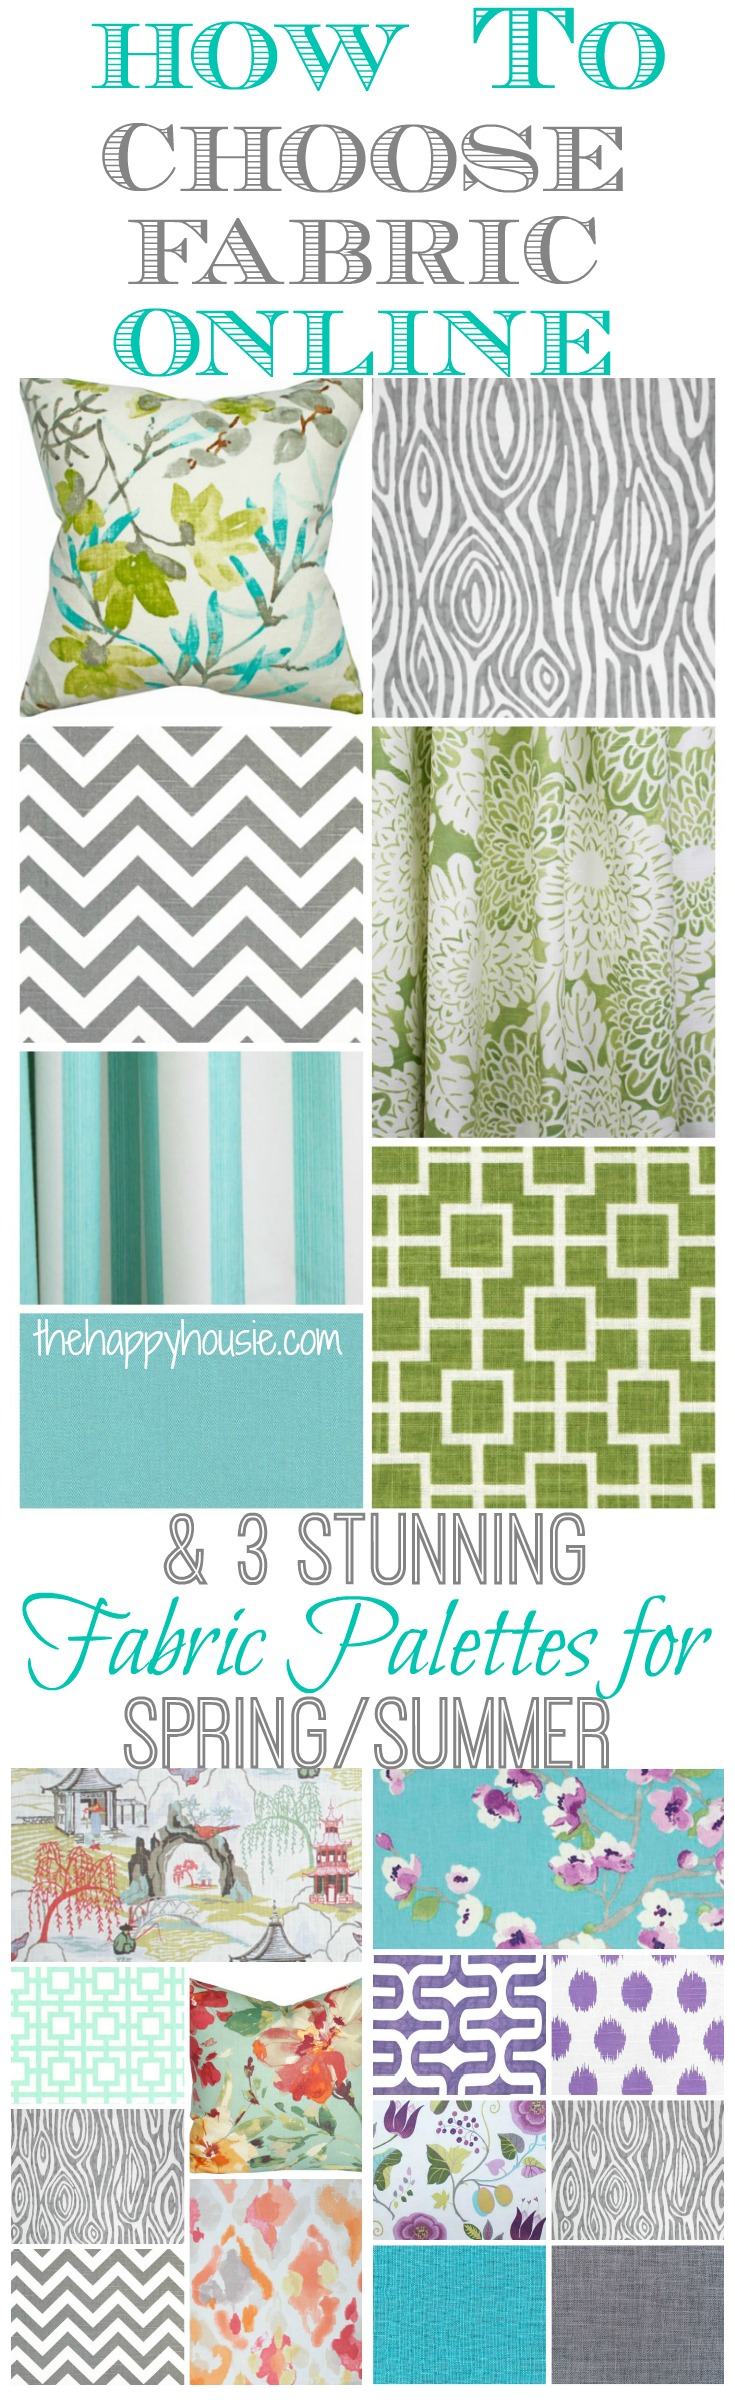 How to choose beautiful fabrics online and three stunning fabric palettes for spring and summer at thehappyhousie.com